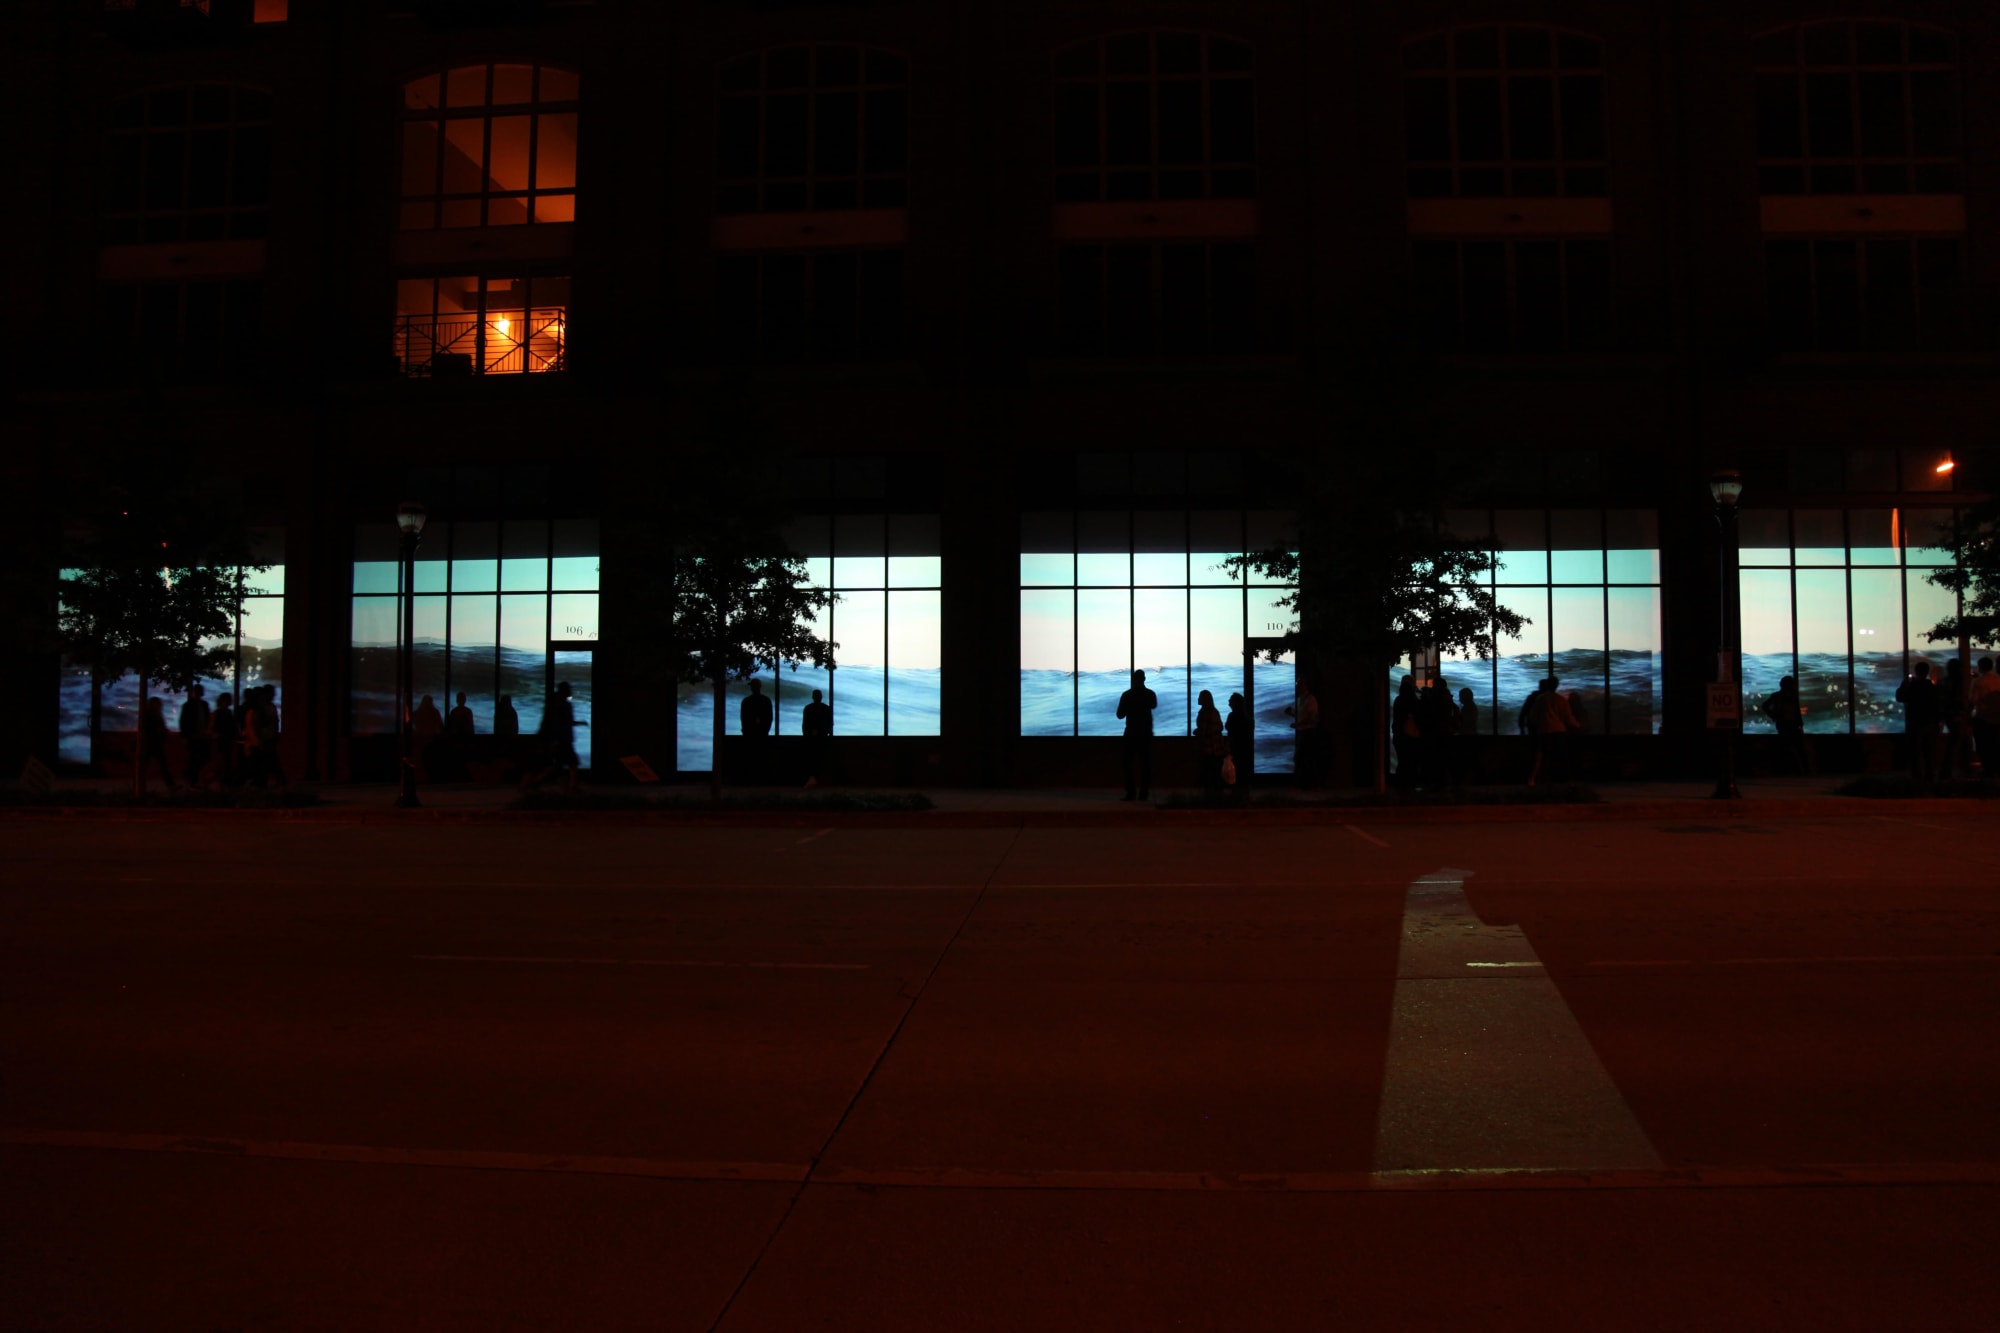 Nighttime photograph of a large commercial center with six of its street-level storefront windows showing a contiguous video projection of water ebbing and flowing.